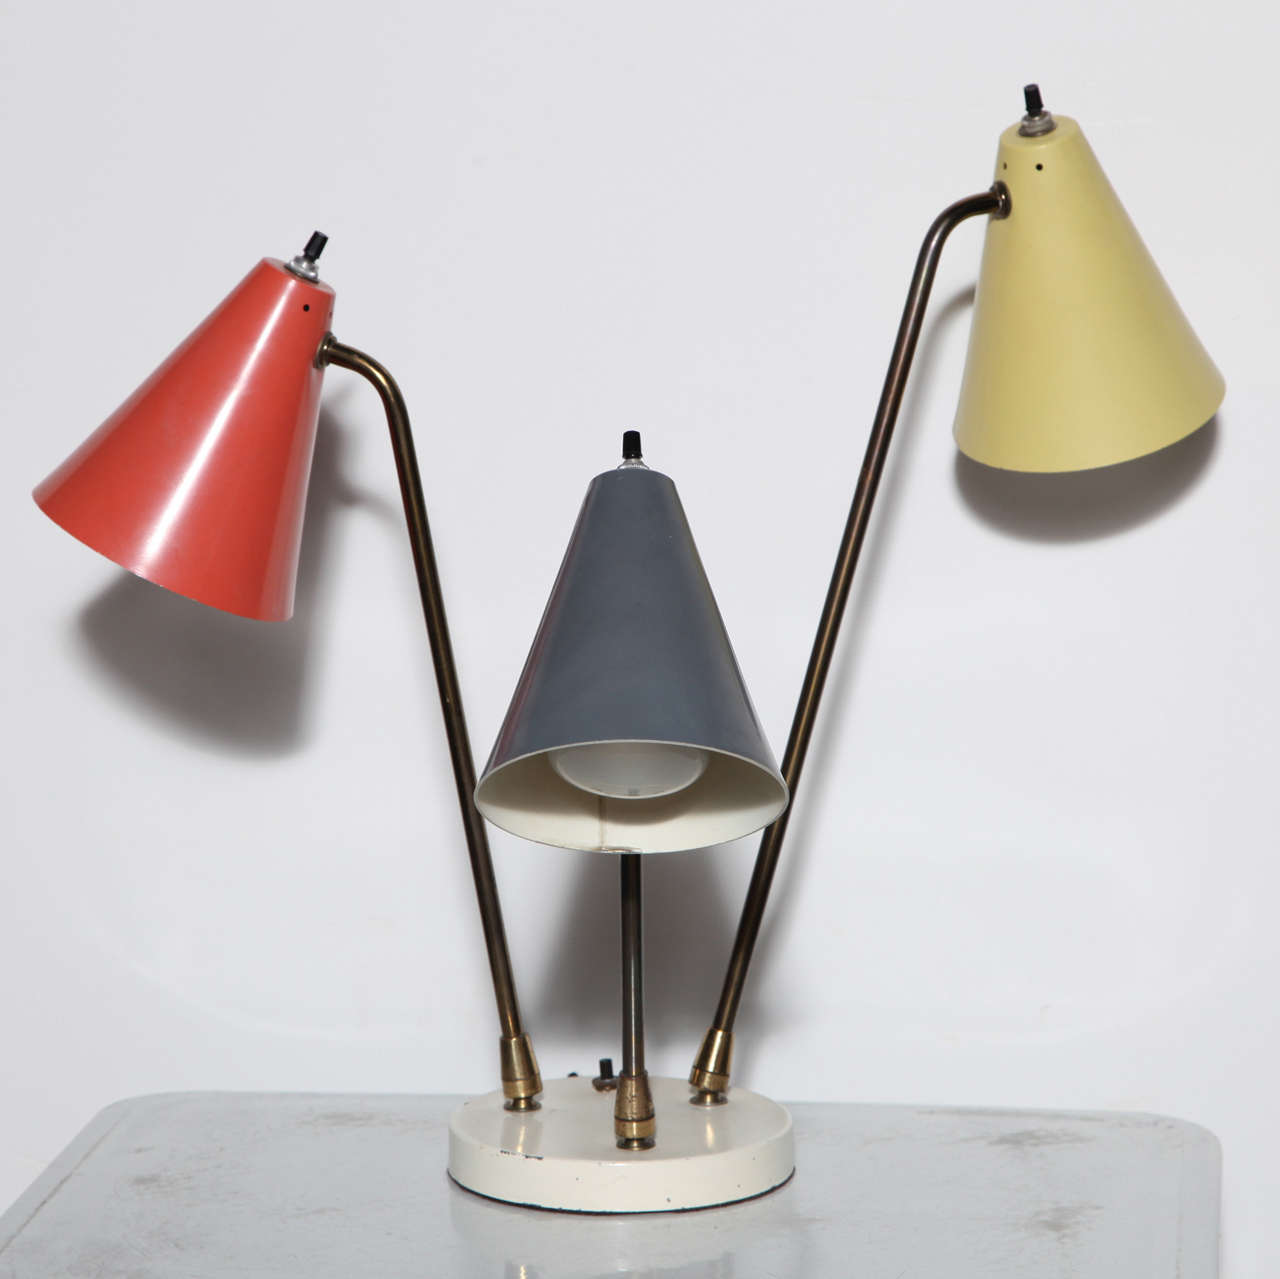 Mid Century Gino Sarfatti style adjustable Desk Lamp. Featuring: 3 enamel Shades in 3 colors: 1) Shade in Tomato Red, 2)  Shade Medium Gray 3) Shade Cream Yellow, 3 articulating Brass arms. Arms adjusts at Base and Head with each arm at different